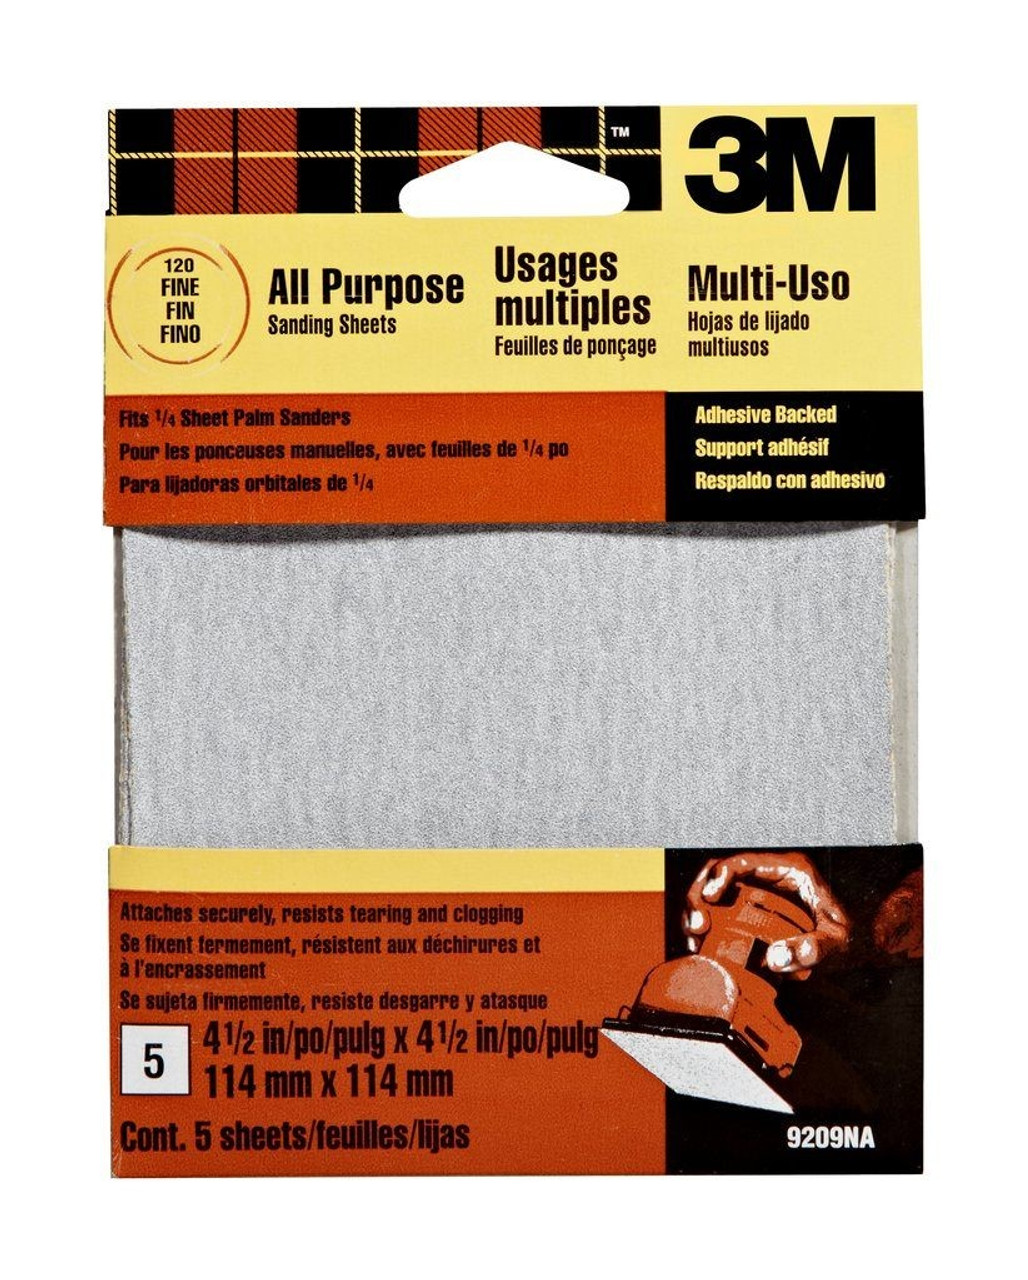 3M™ Adhesive Backed Palm Sander Sheets (9209NA), 4.5 in x 4.5 in Fine Grit, 1-Pk/5-Sheets